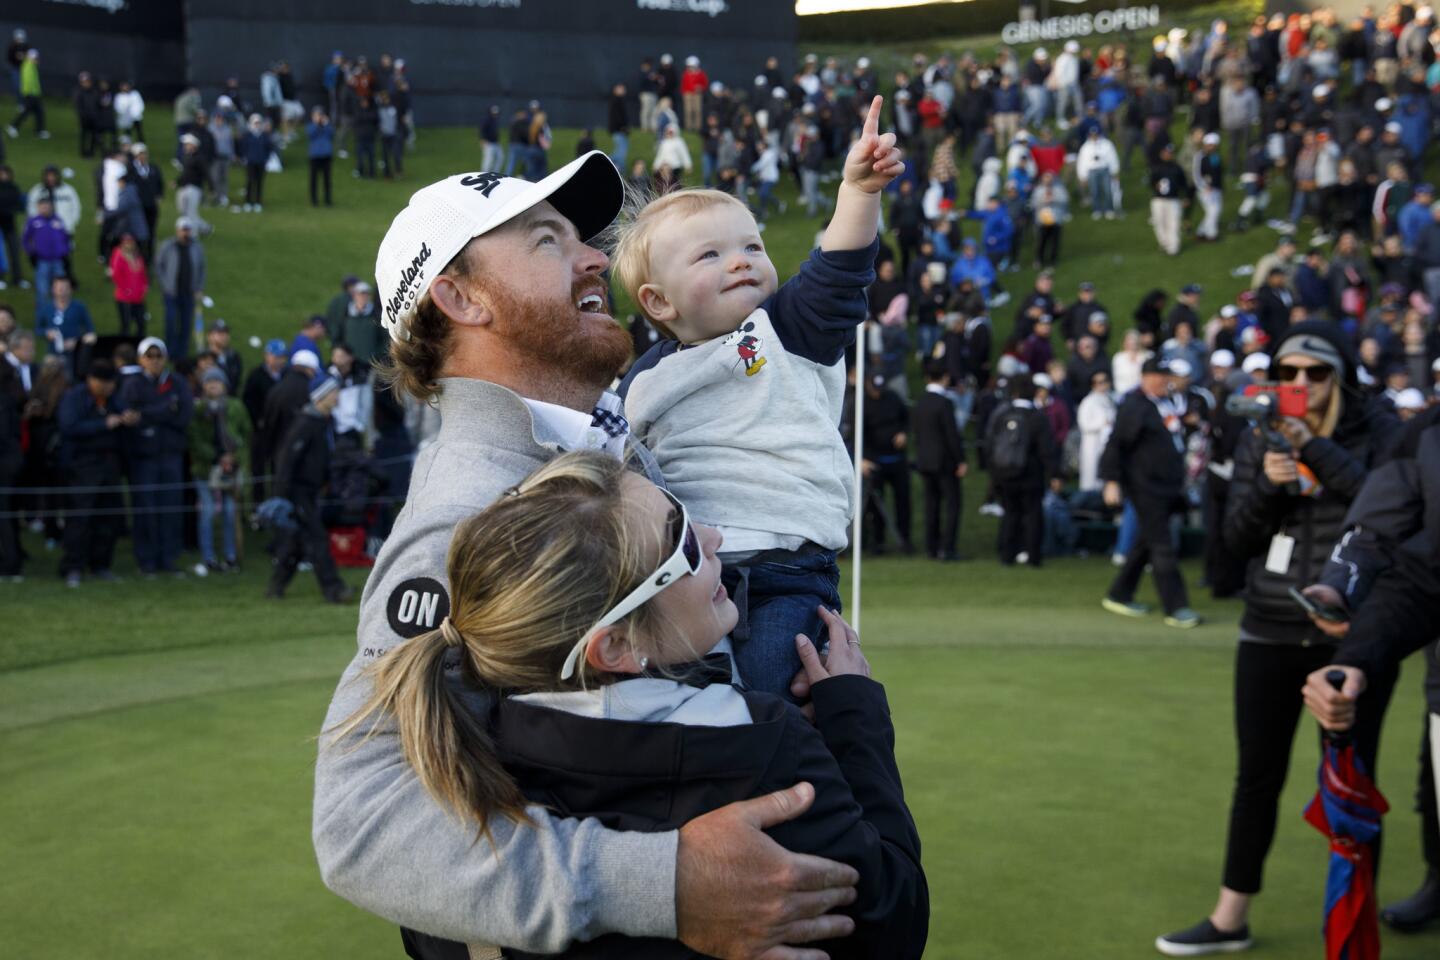 J.B. Holmes hugs his son Tucker and wife Erica after winning on the 18th hole the Genesis Open golf tournament at the Riviera Country Club.